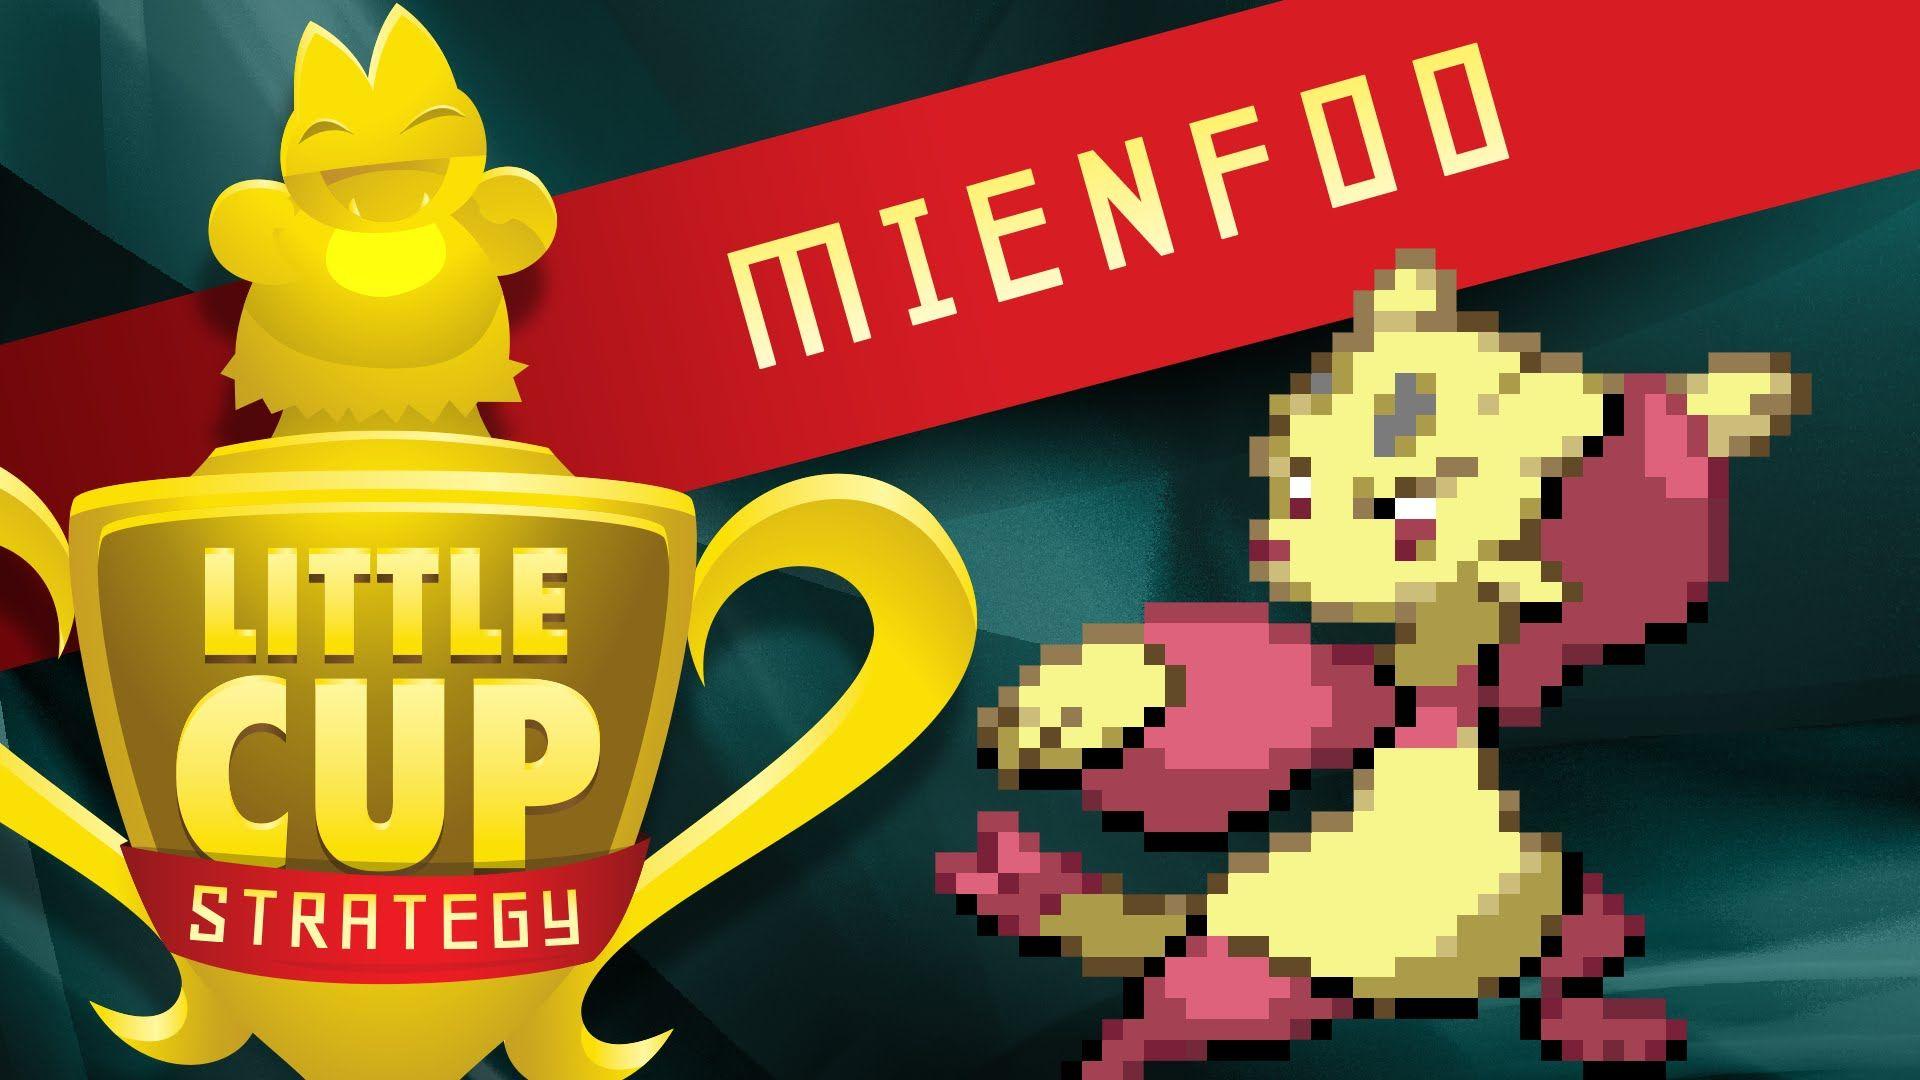 Little Cup - Mienfoo Pokenalysis [Strategy & Movesets]